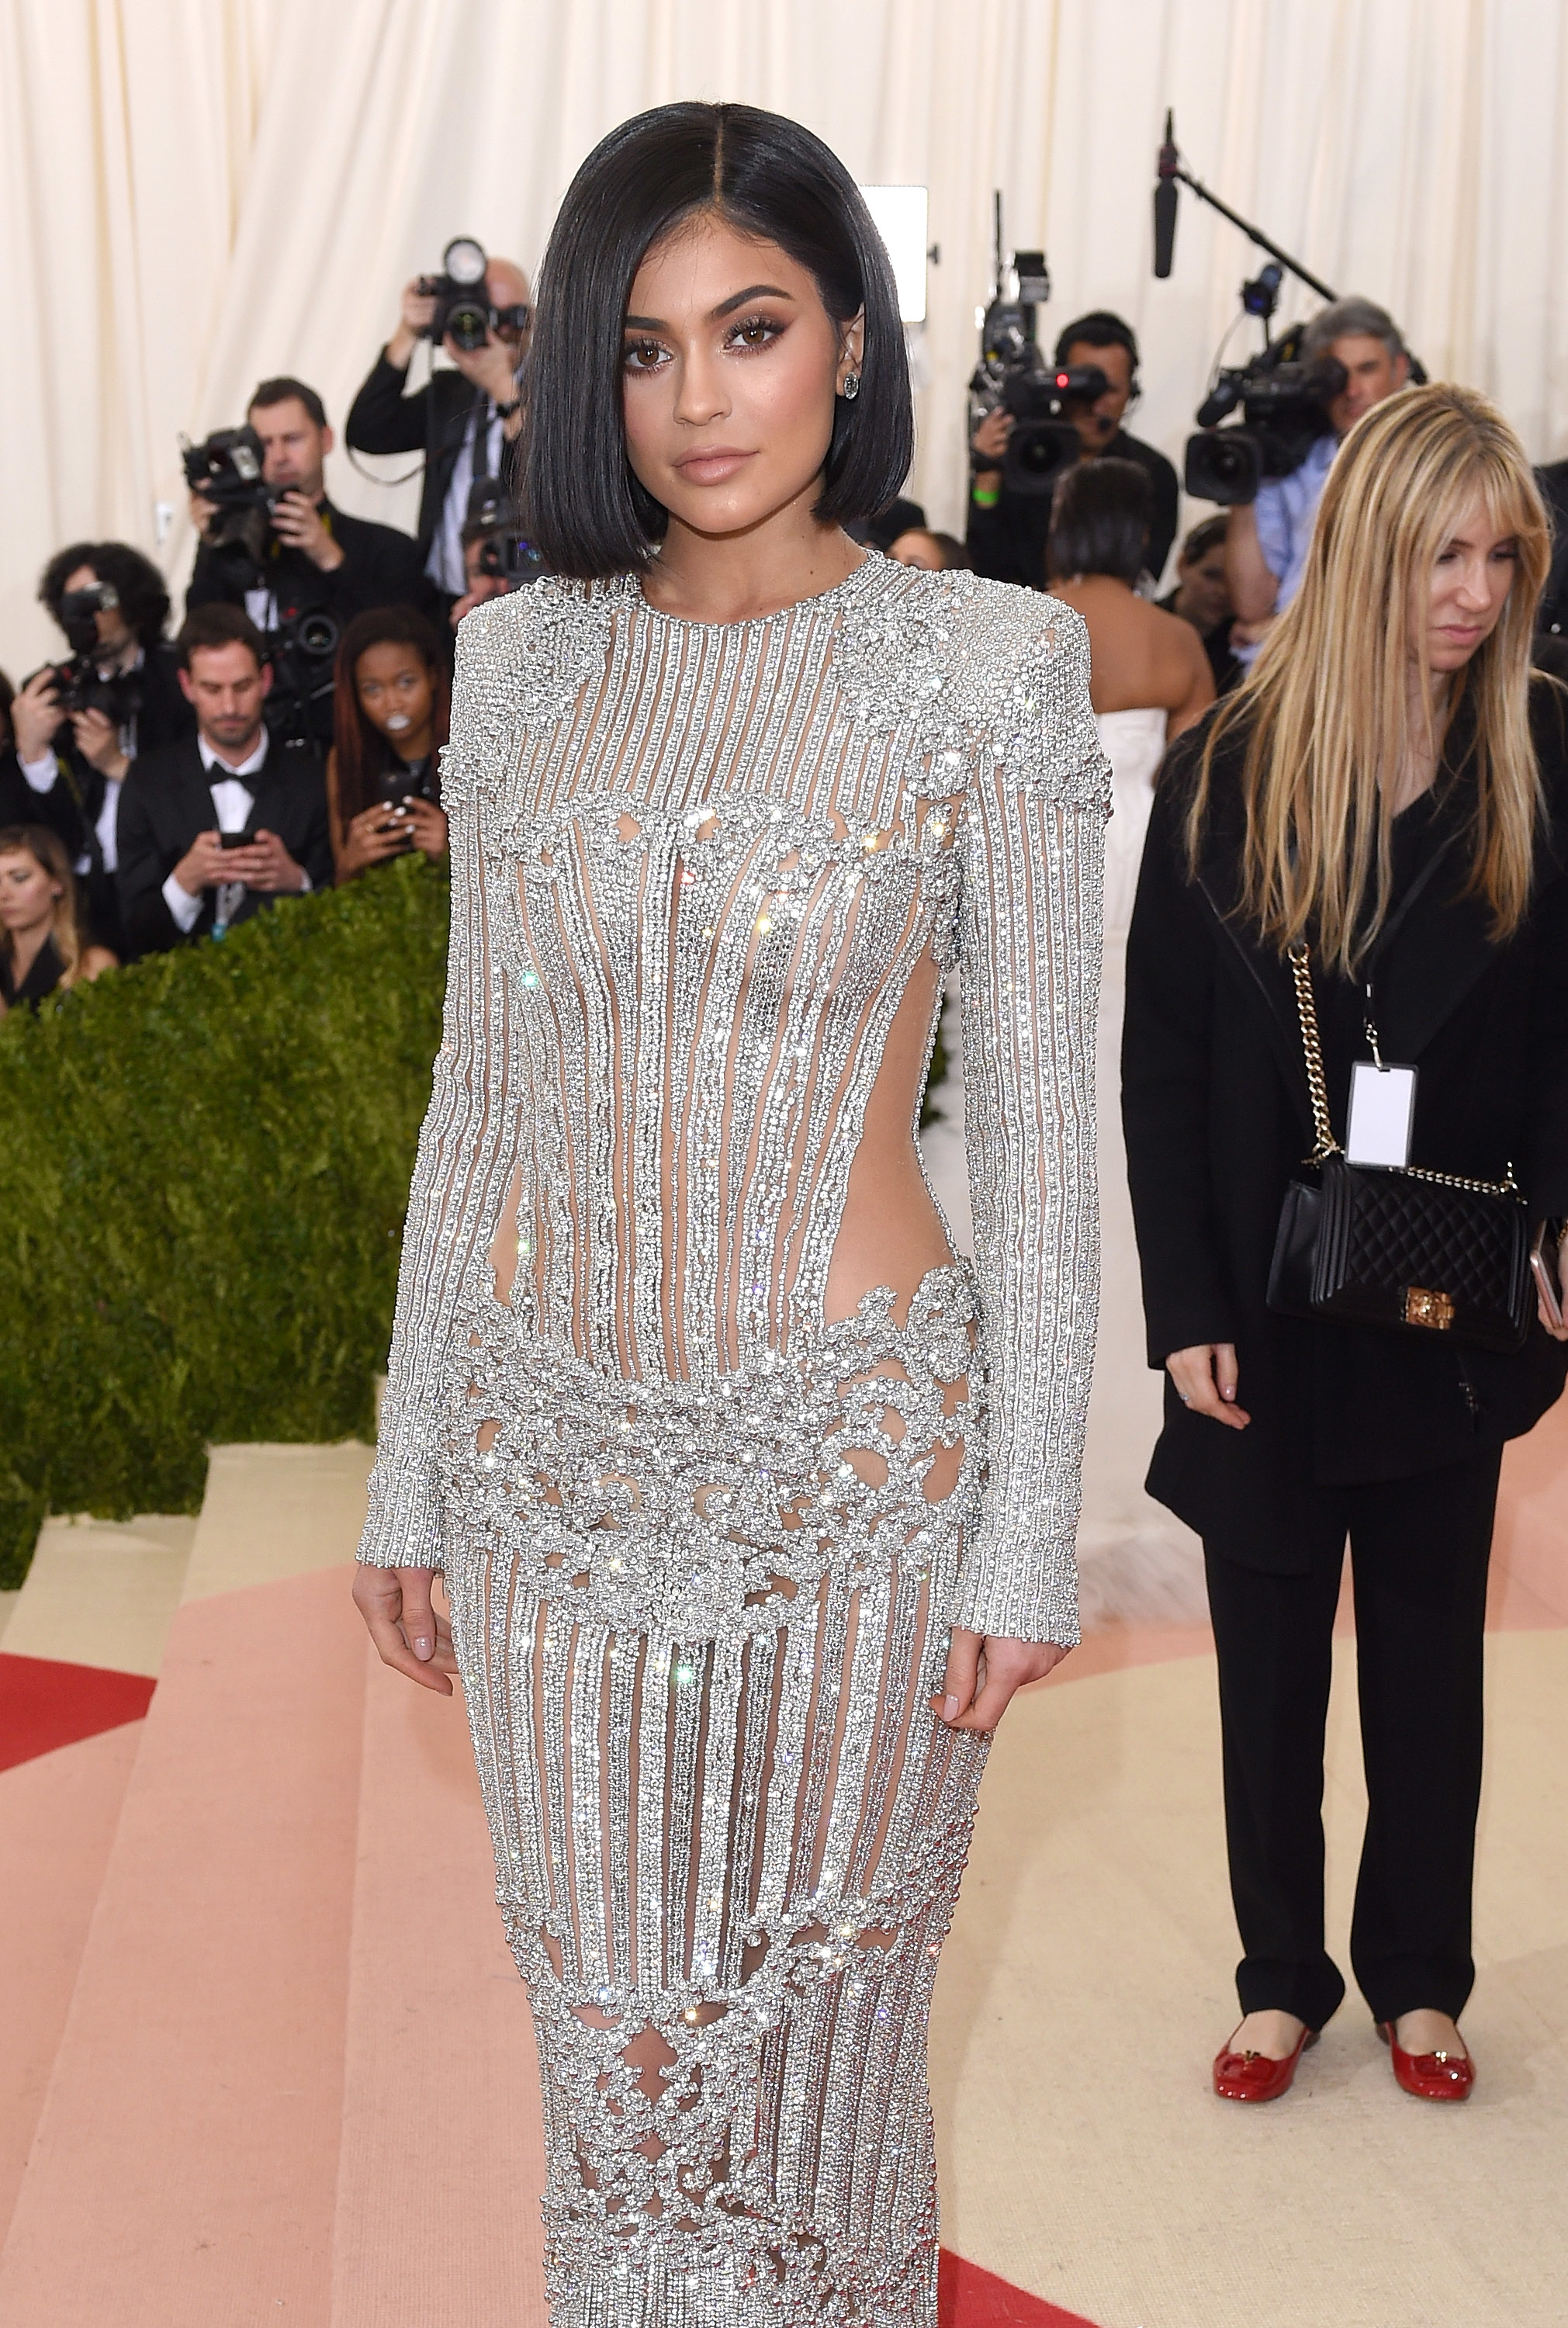 Kylie Jenner in a sparkling, embellished gown with cut-outs at a gala event